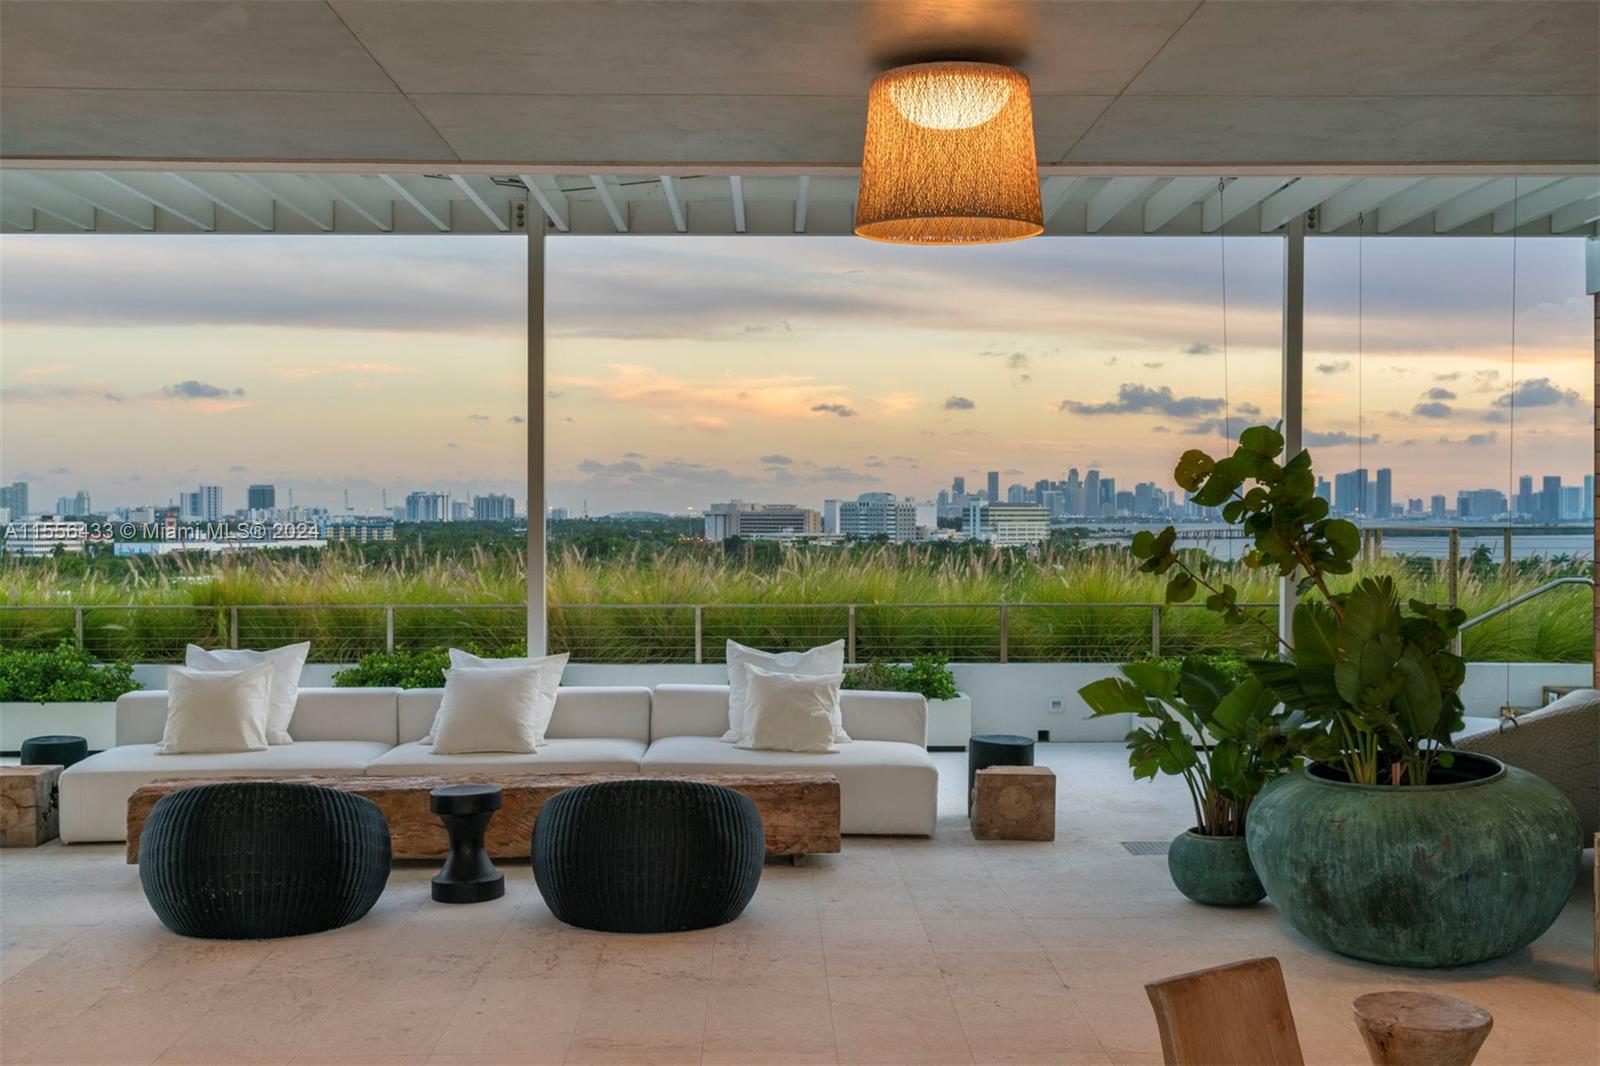 This turnkey penthouse features CEU Design + heirloom pieces in nearly 9,000 SF of indoor/outdoor living exuding the art of home. Full-time butler service. Open floorpan. 300+ degrees of unobstructed Miami & Biscayne Bay views. Private elevator entry into foyer. Floor-to-ceiling windows w/ natural light. 11” Oscar Ono wood floors throughout living areas & bedrooms. Custom Boffi kitchen + SS Gaggenau appliances. Primary suite features custom Salvatori Signature bathroom w/ bay views, Custom Porro closets & Fantini fixtures. Wraparound terraces perfect for entertaining w/ Ipe & teak wood flooring overlook the ocean, skyline & Biscayne Bay. Waterfront location including rooftop pool deck w/ cabanas & grille, lush meditation garden + hotel amenities, 2 parking spaces, storage & 40’ boat slip.